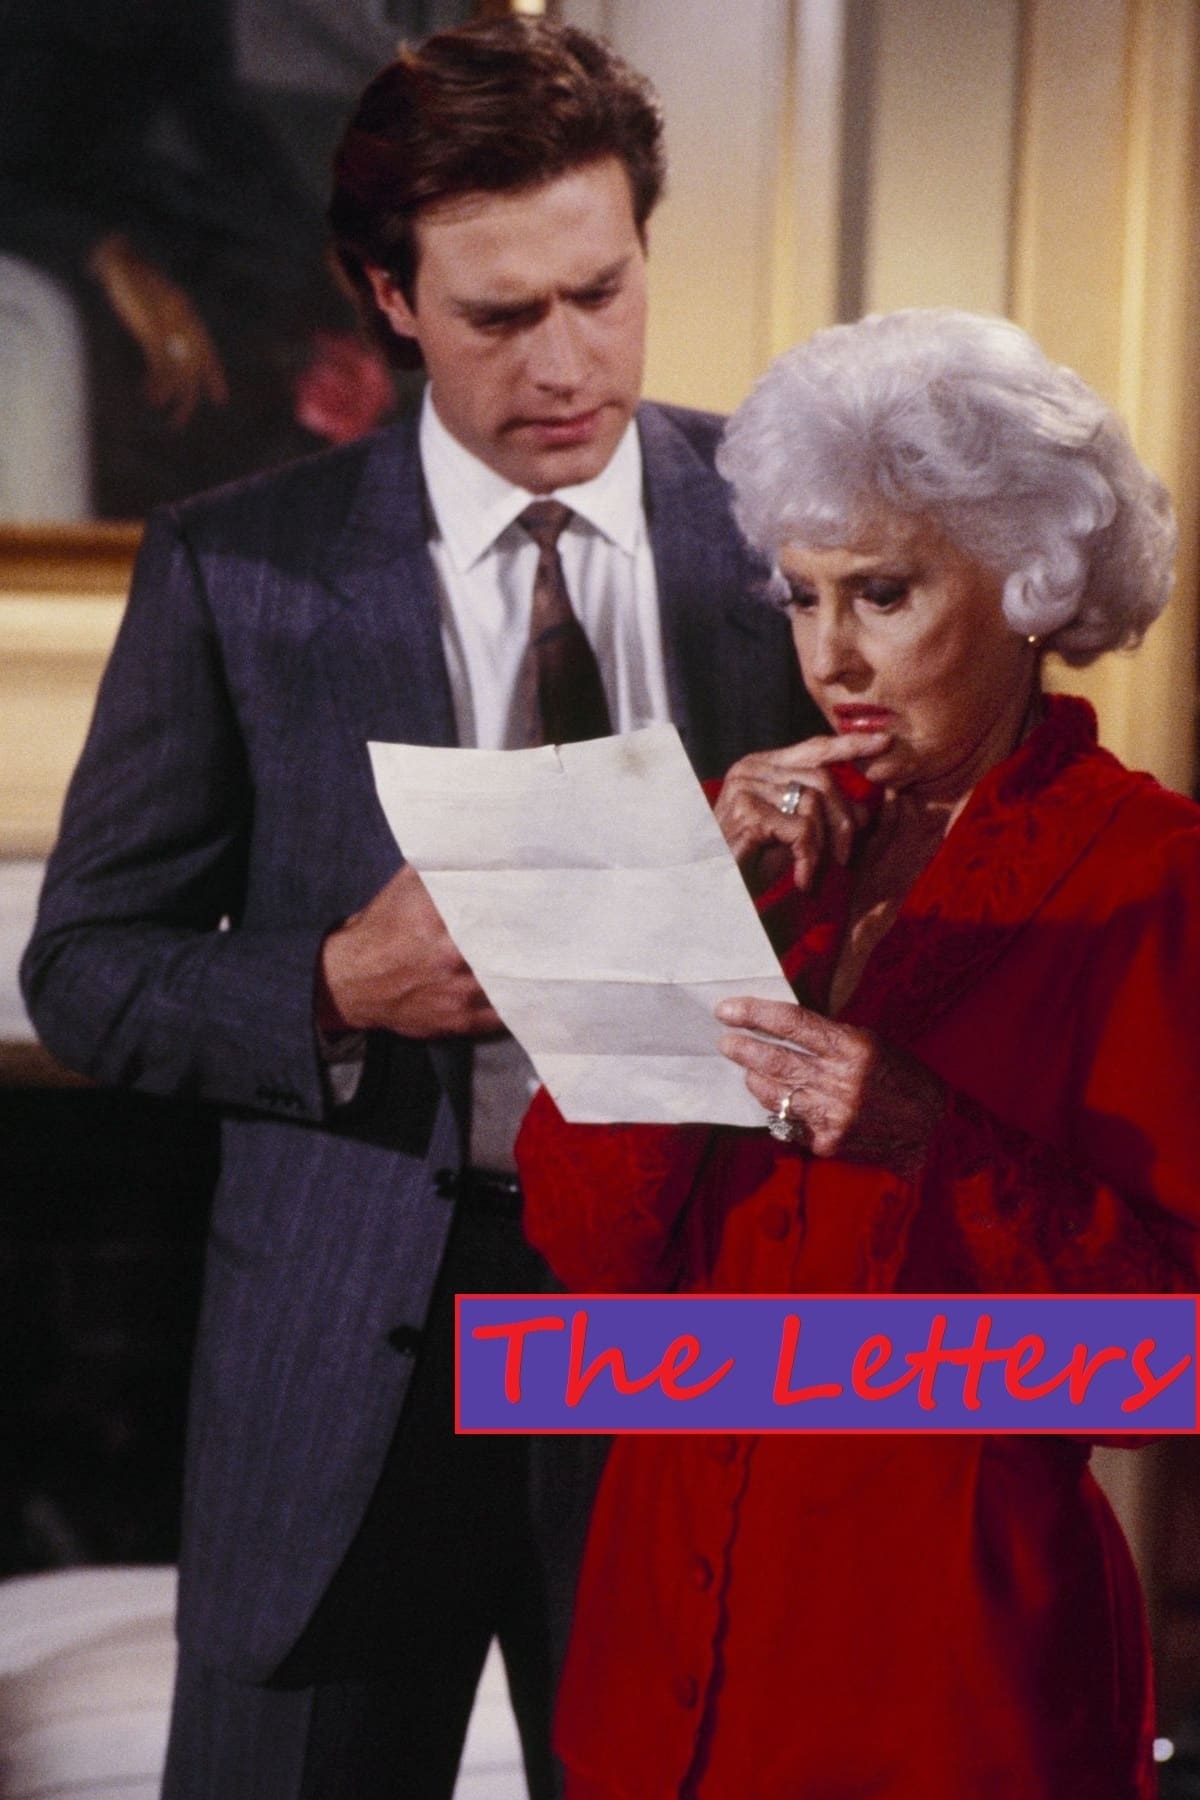 The Letters (1973)